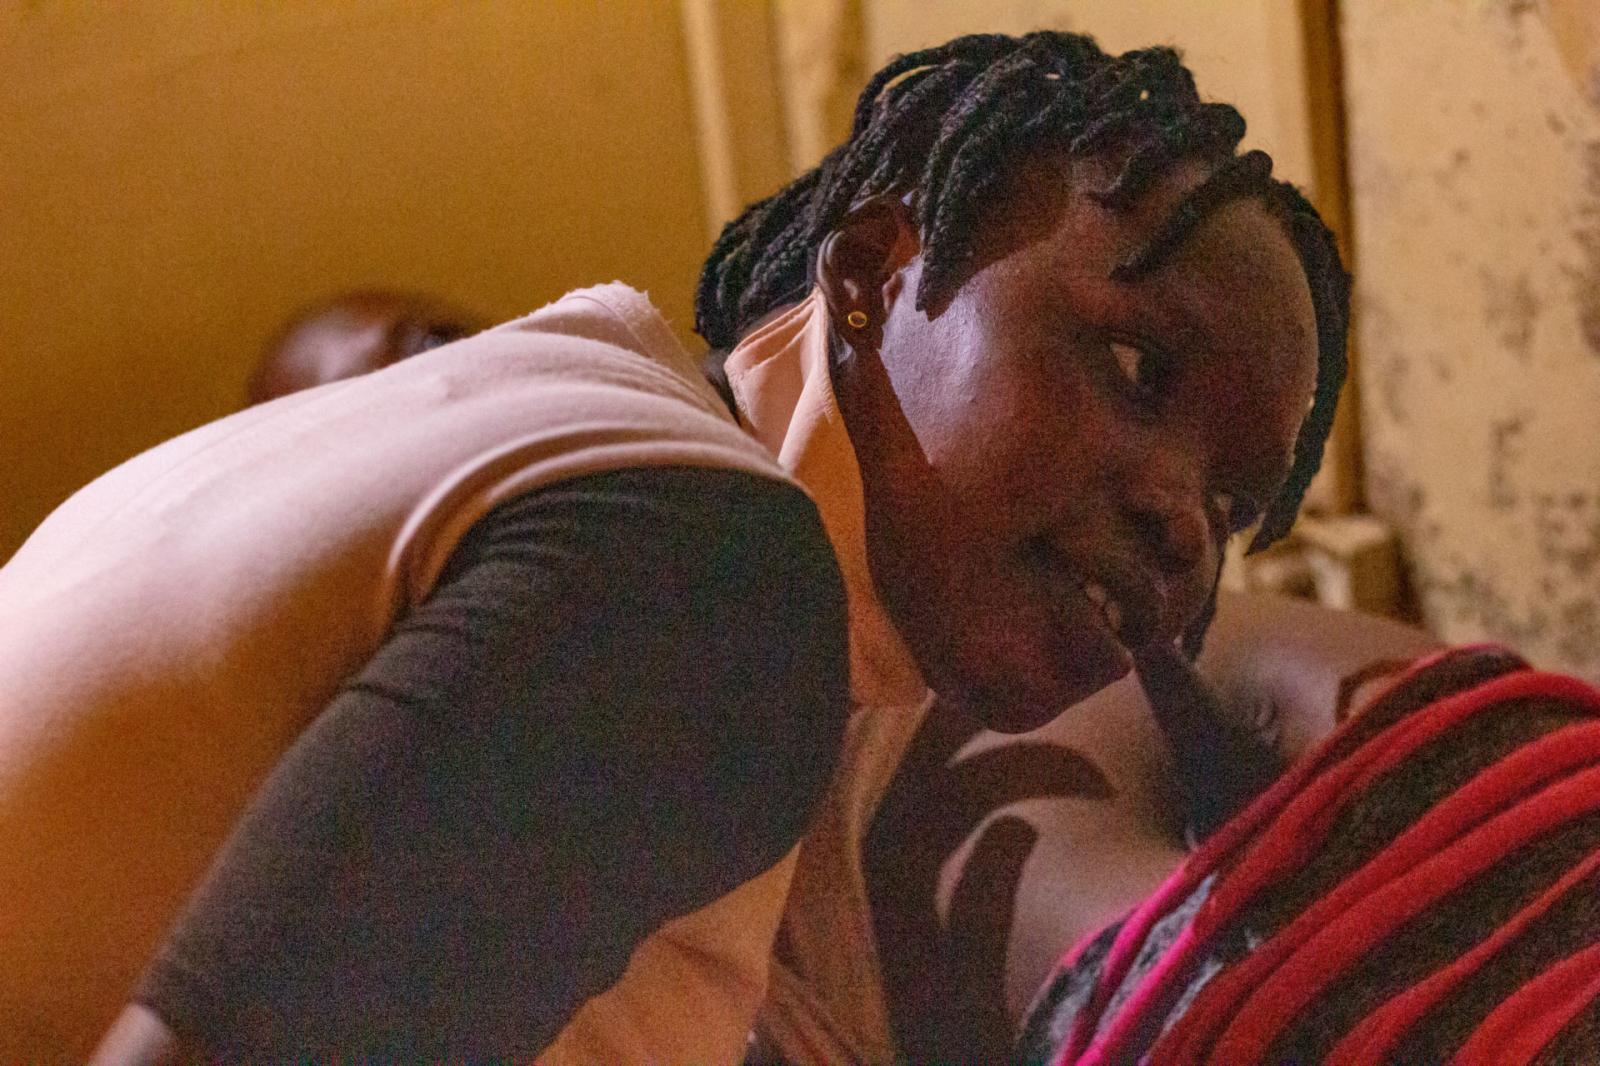 A pregnant teenage girl visits a medical worker at St Nicolas Clinic after experiencing abdominal pain for several days. A reluctance by expectant teens to attend routine checkups is a sign that maternal health outreaches are failing to reach some of the people that need them most.